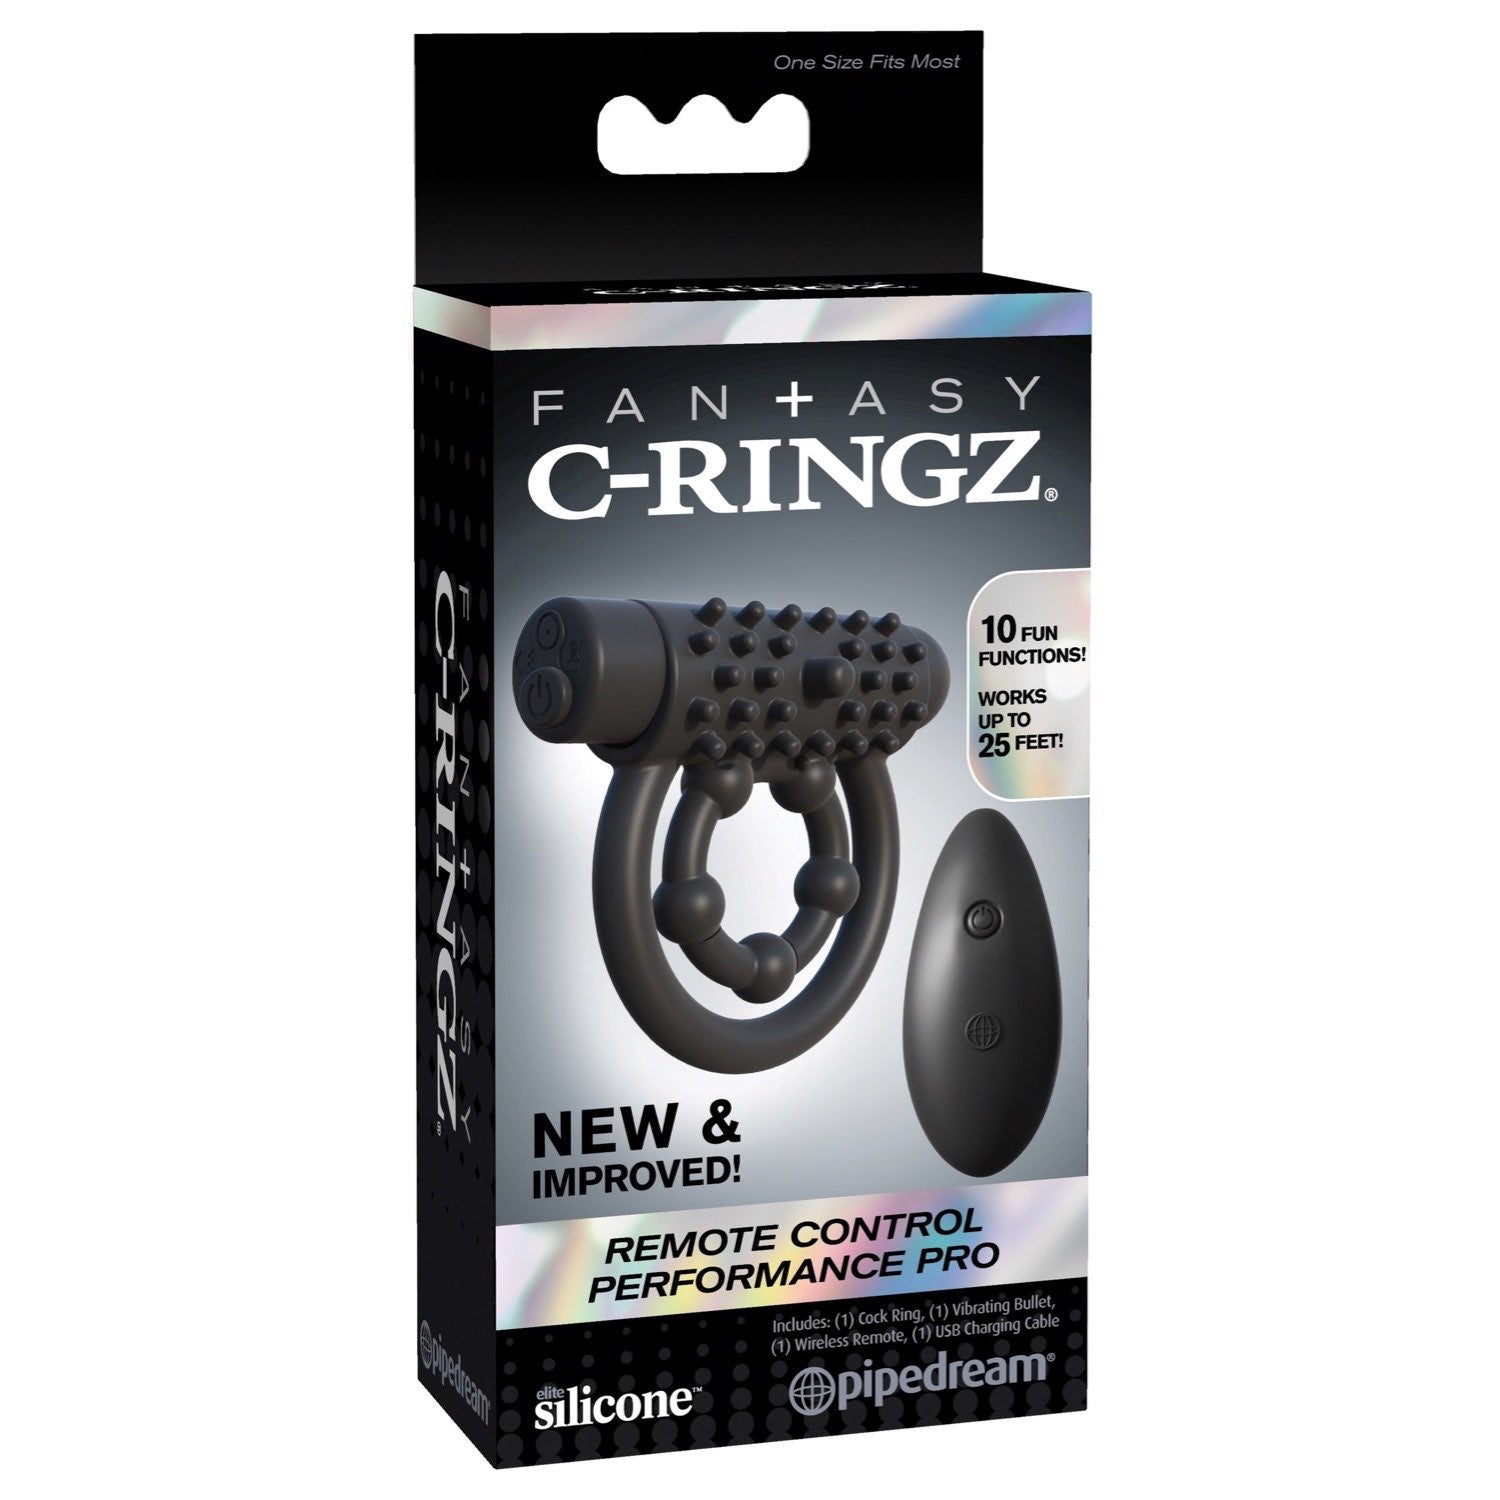 Fantasy C-Ringz Fantasy C-ringz Remote Control Performance Pro - Black Vibrating Cock &amp; Ball Rings with Remote by Pipedream